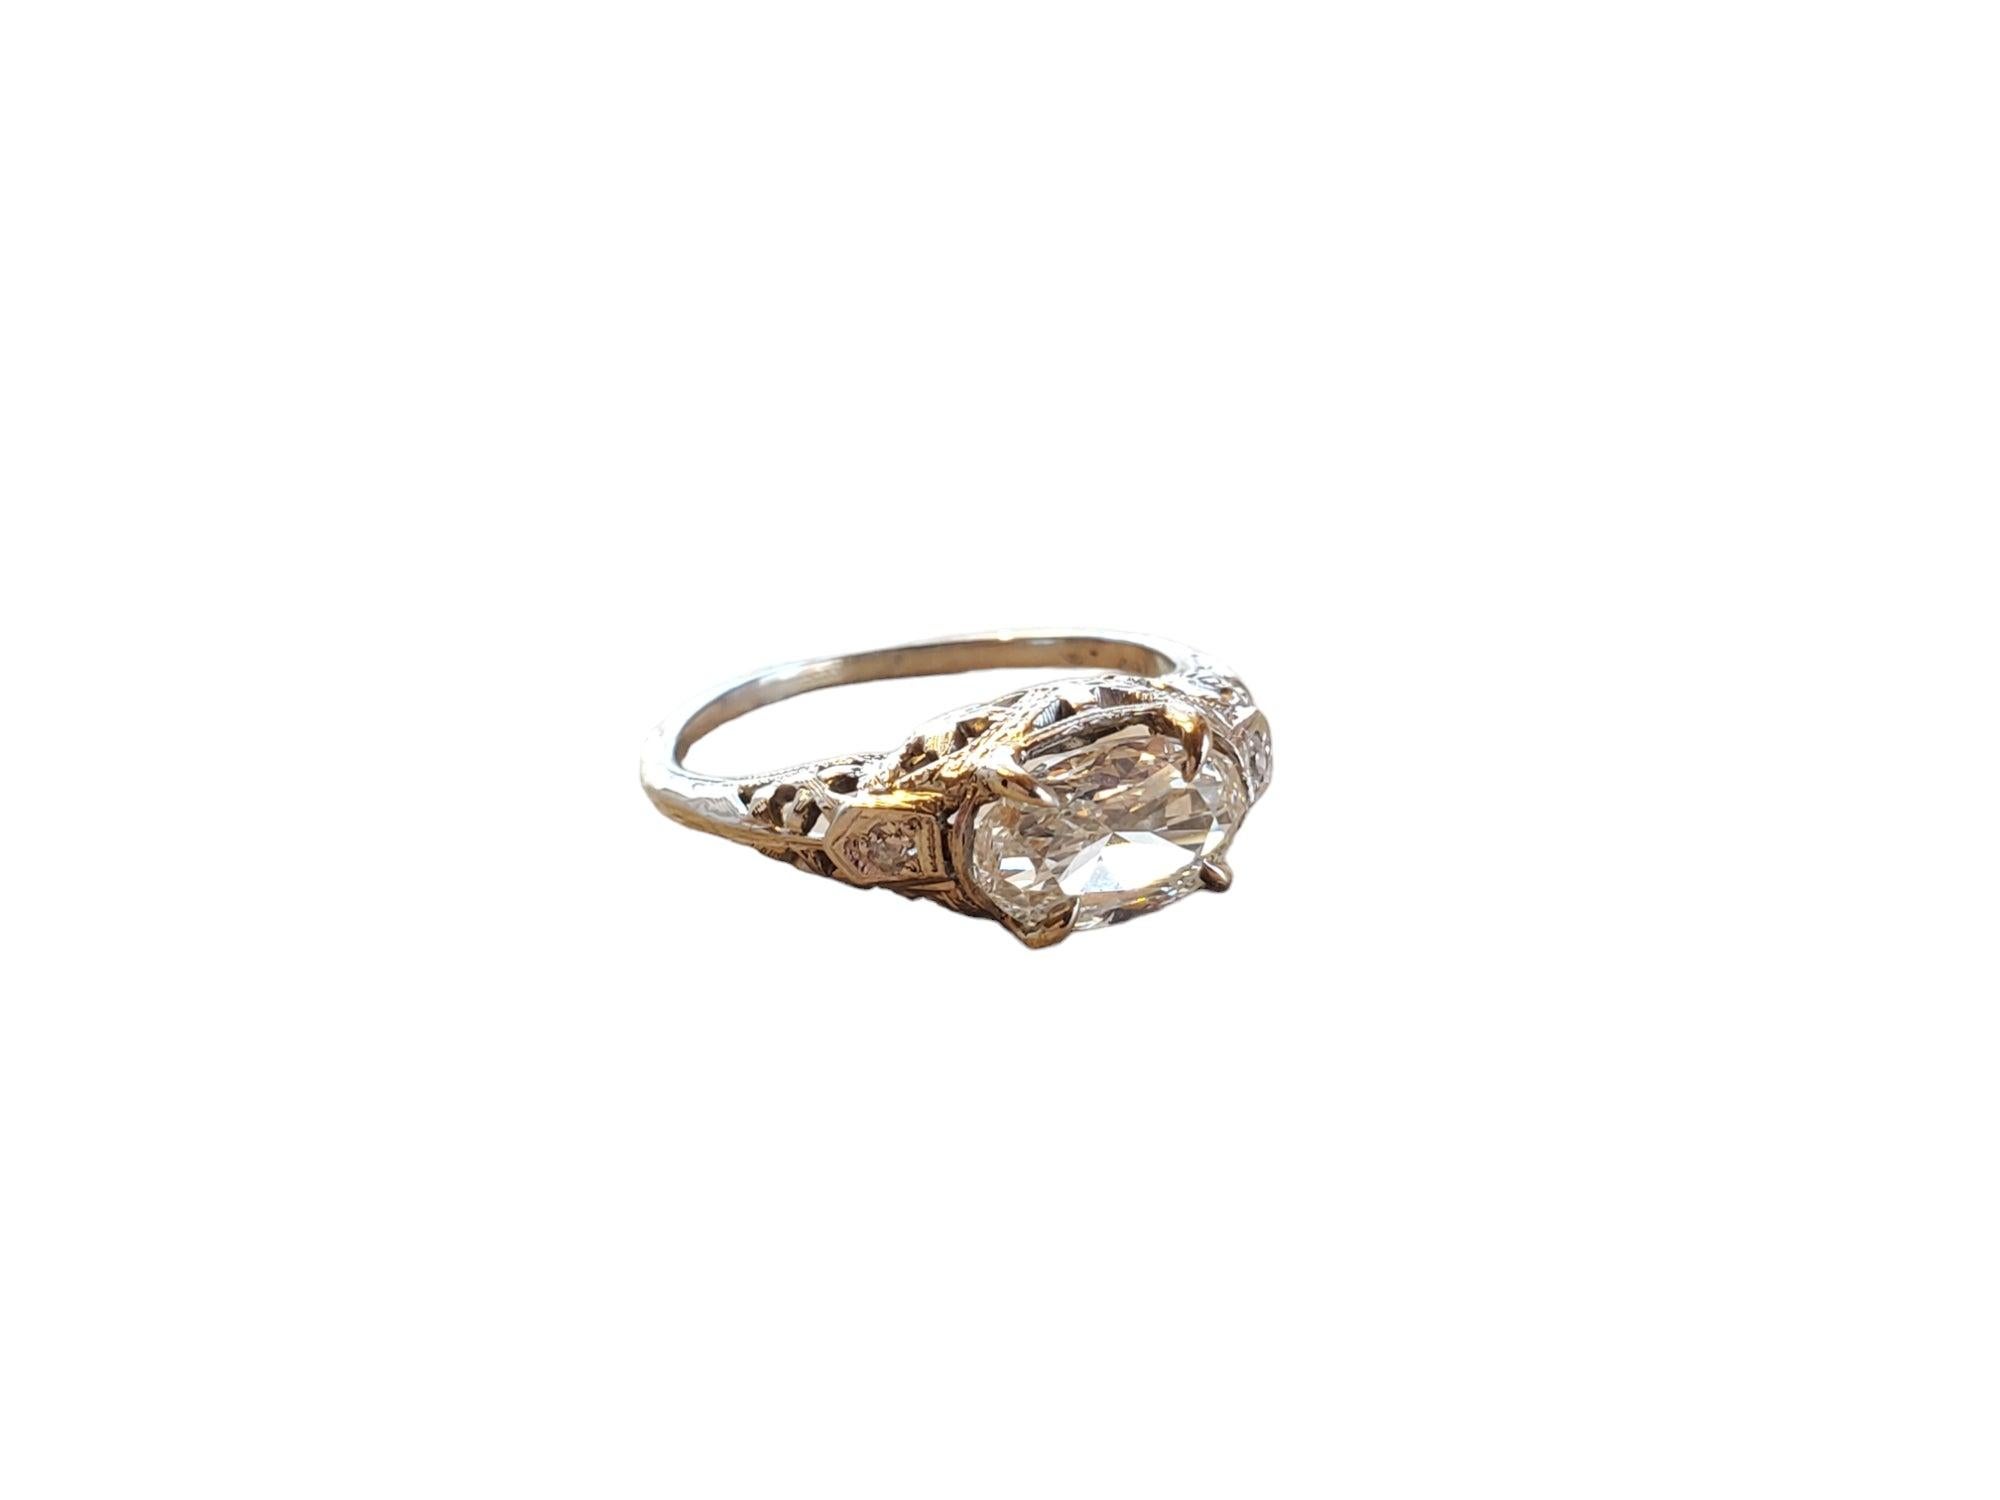 This listing is for an art deco 18k wg oval diamond ring. The center stone is a gorgeous older oval set east/west and weighing .90ct with 2 accent diamonds. The stone is very clean and white facing with a tiny bit of warmth. Size is 5.75